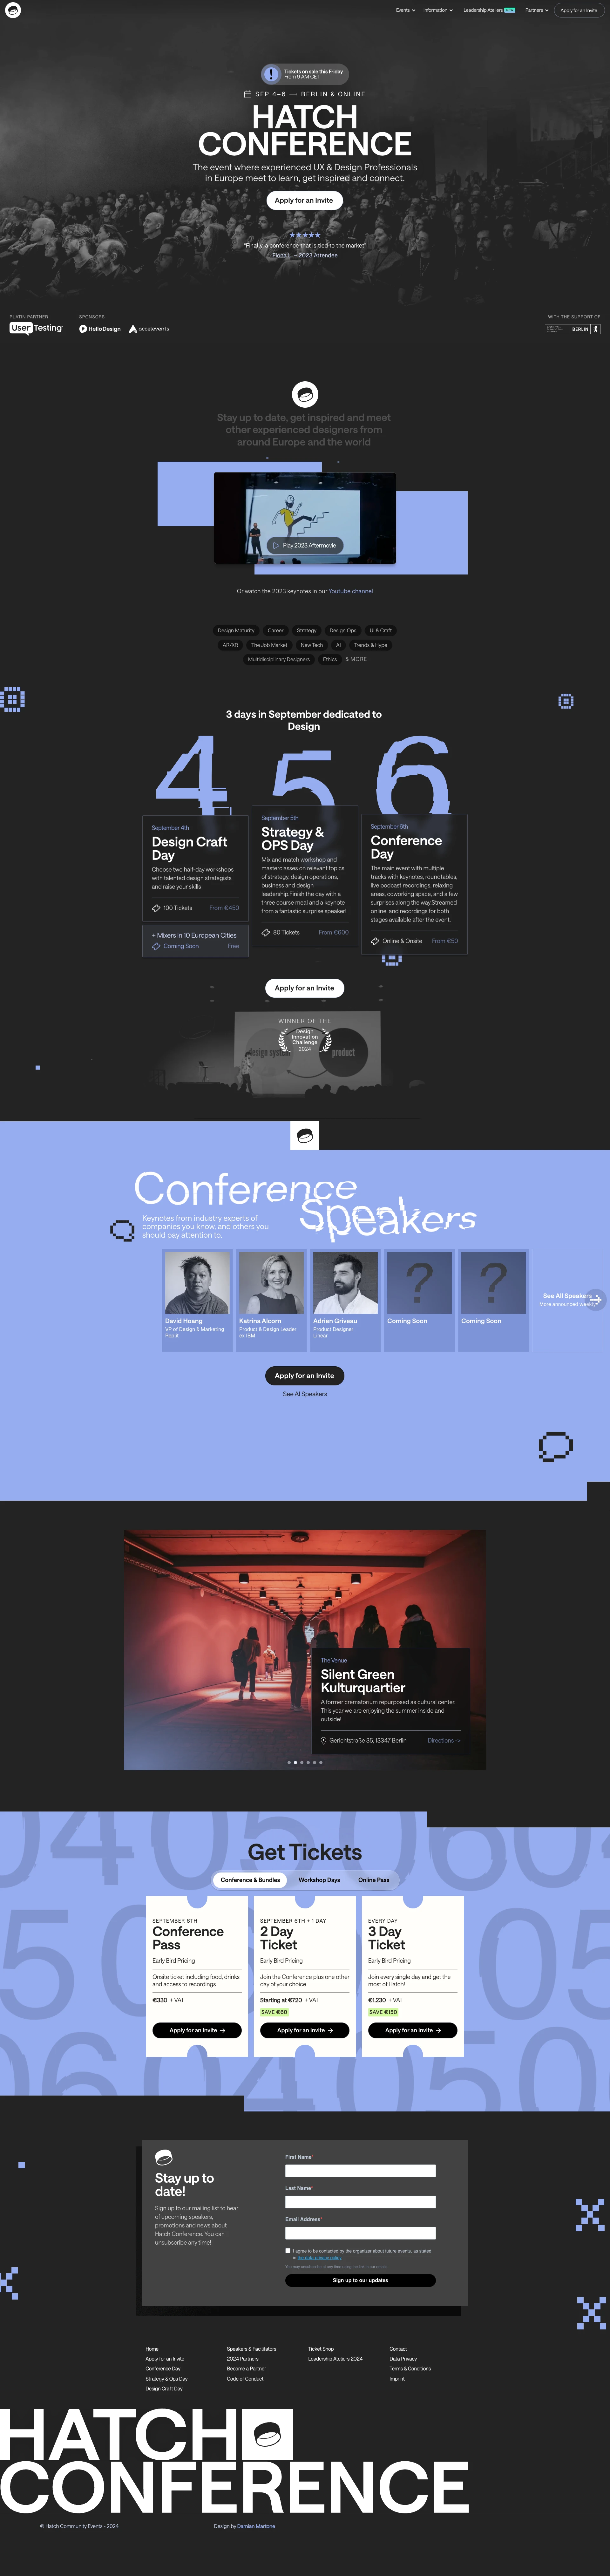 Hatch Conference Landing Page Example: The event where experienced UX & Design Professionals in Europe meet to learn, get inspired and connect.